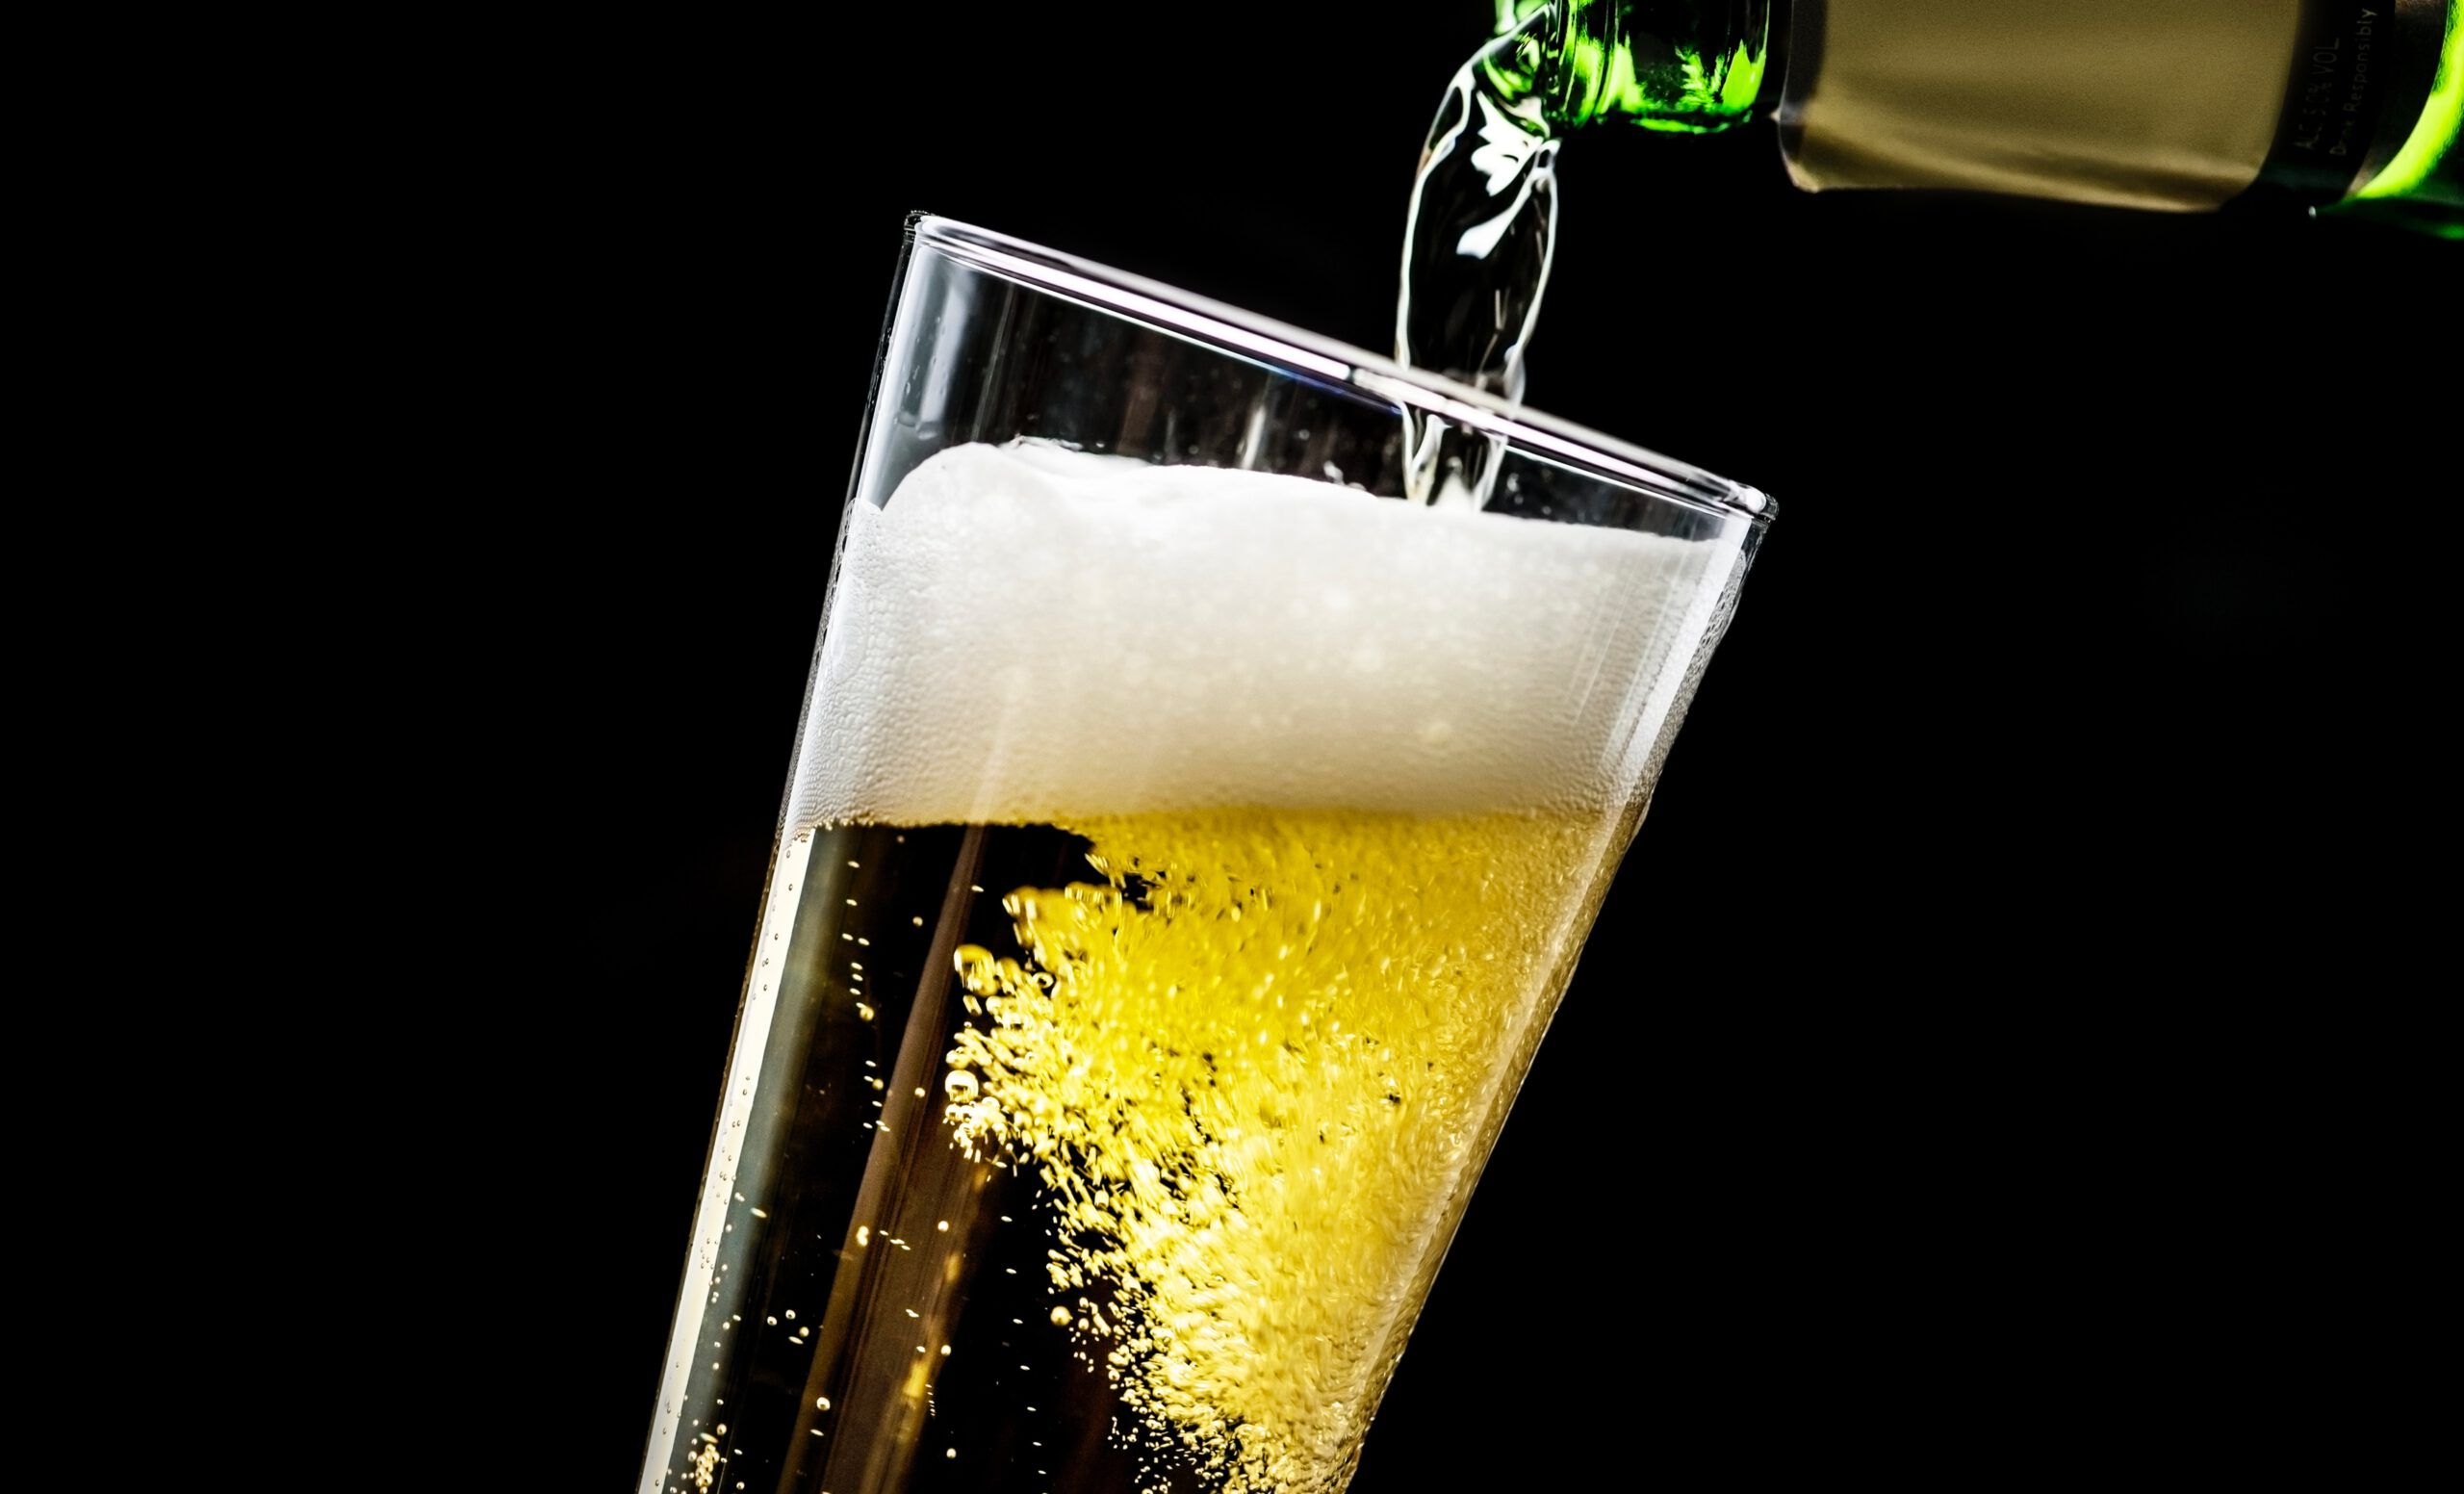 Alcohol delivery can be a boon for eateries as off-premise dining grows [image: beer pouring from a bottle into a glass]